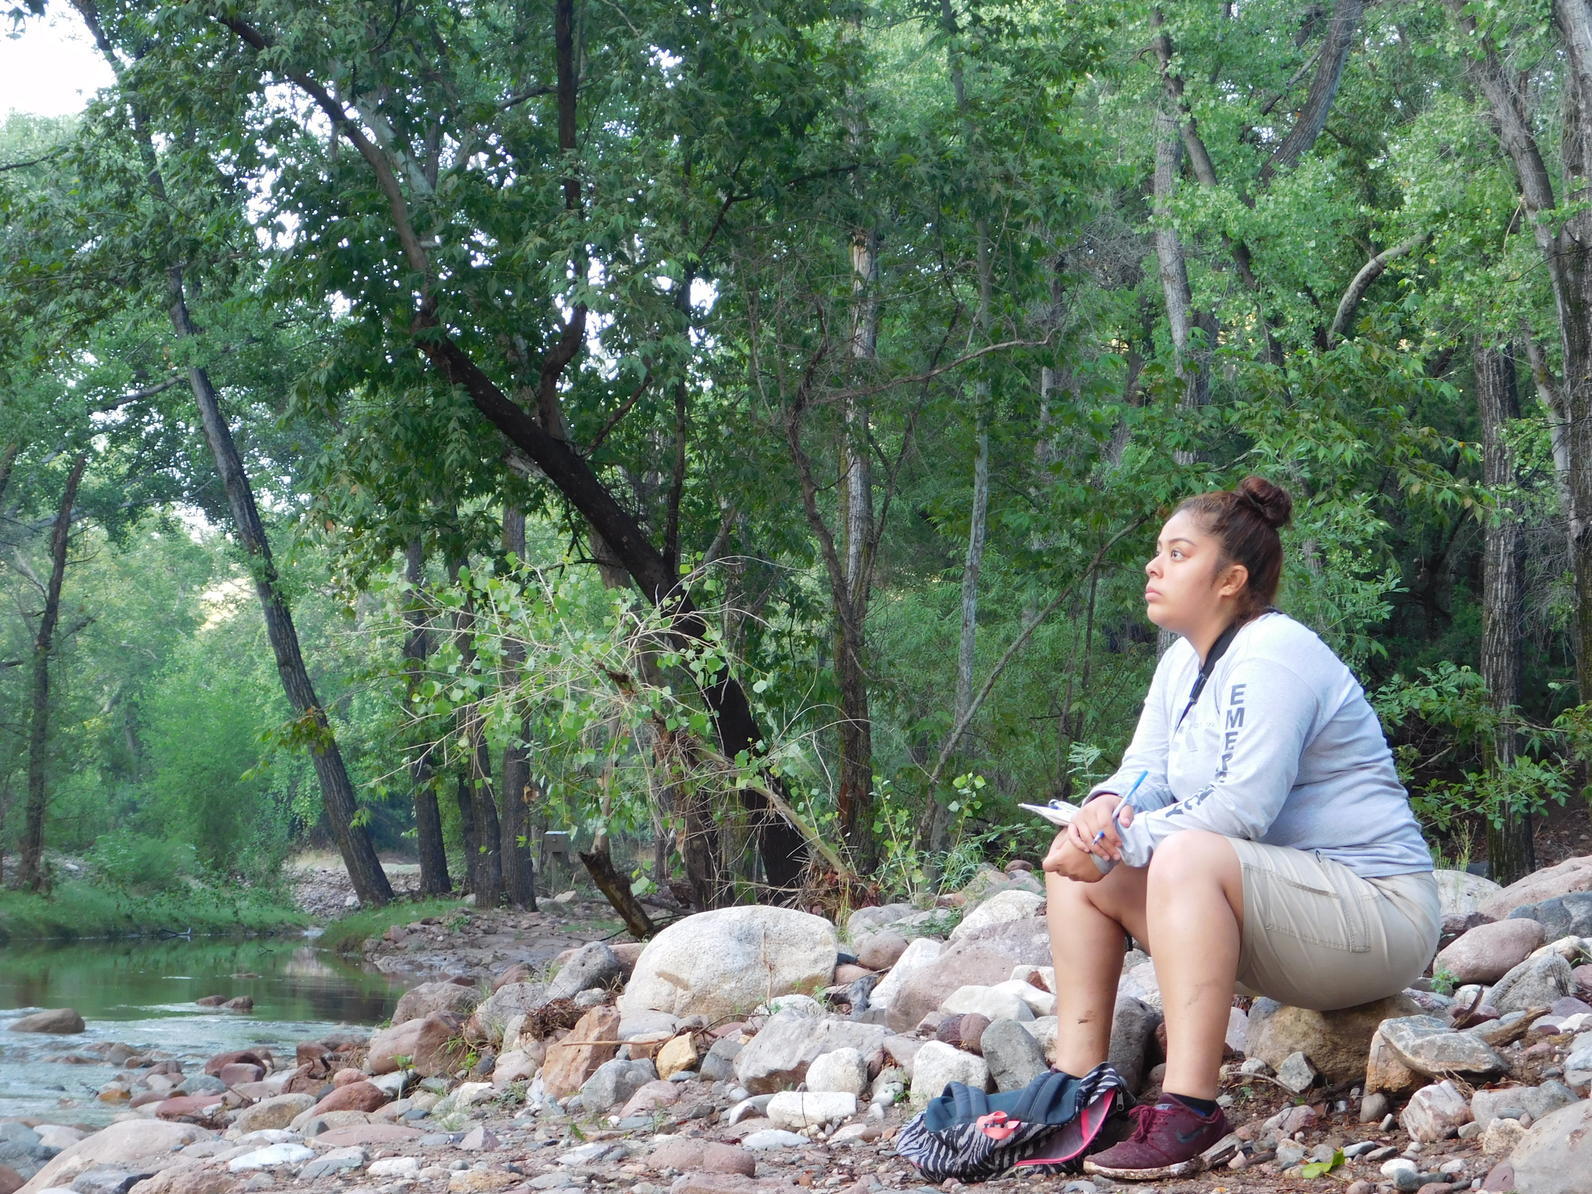 Aritzel Baez, one of last year's summer interns, looks at foliage along the riverbank.